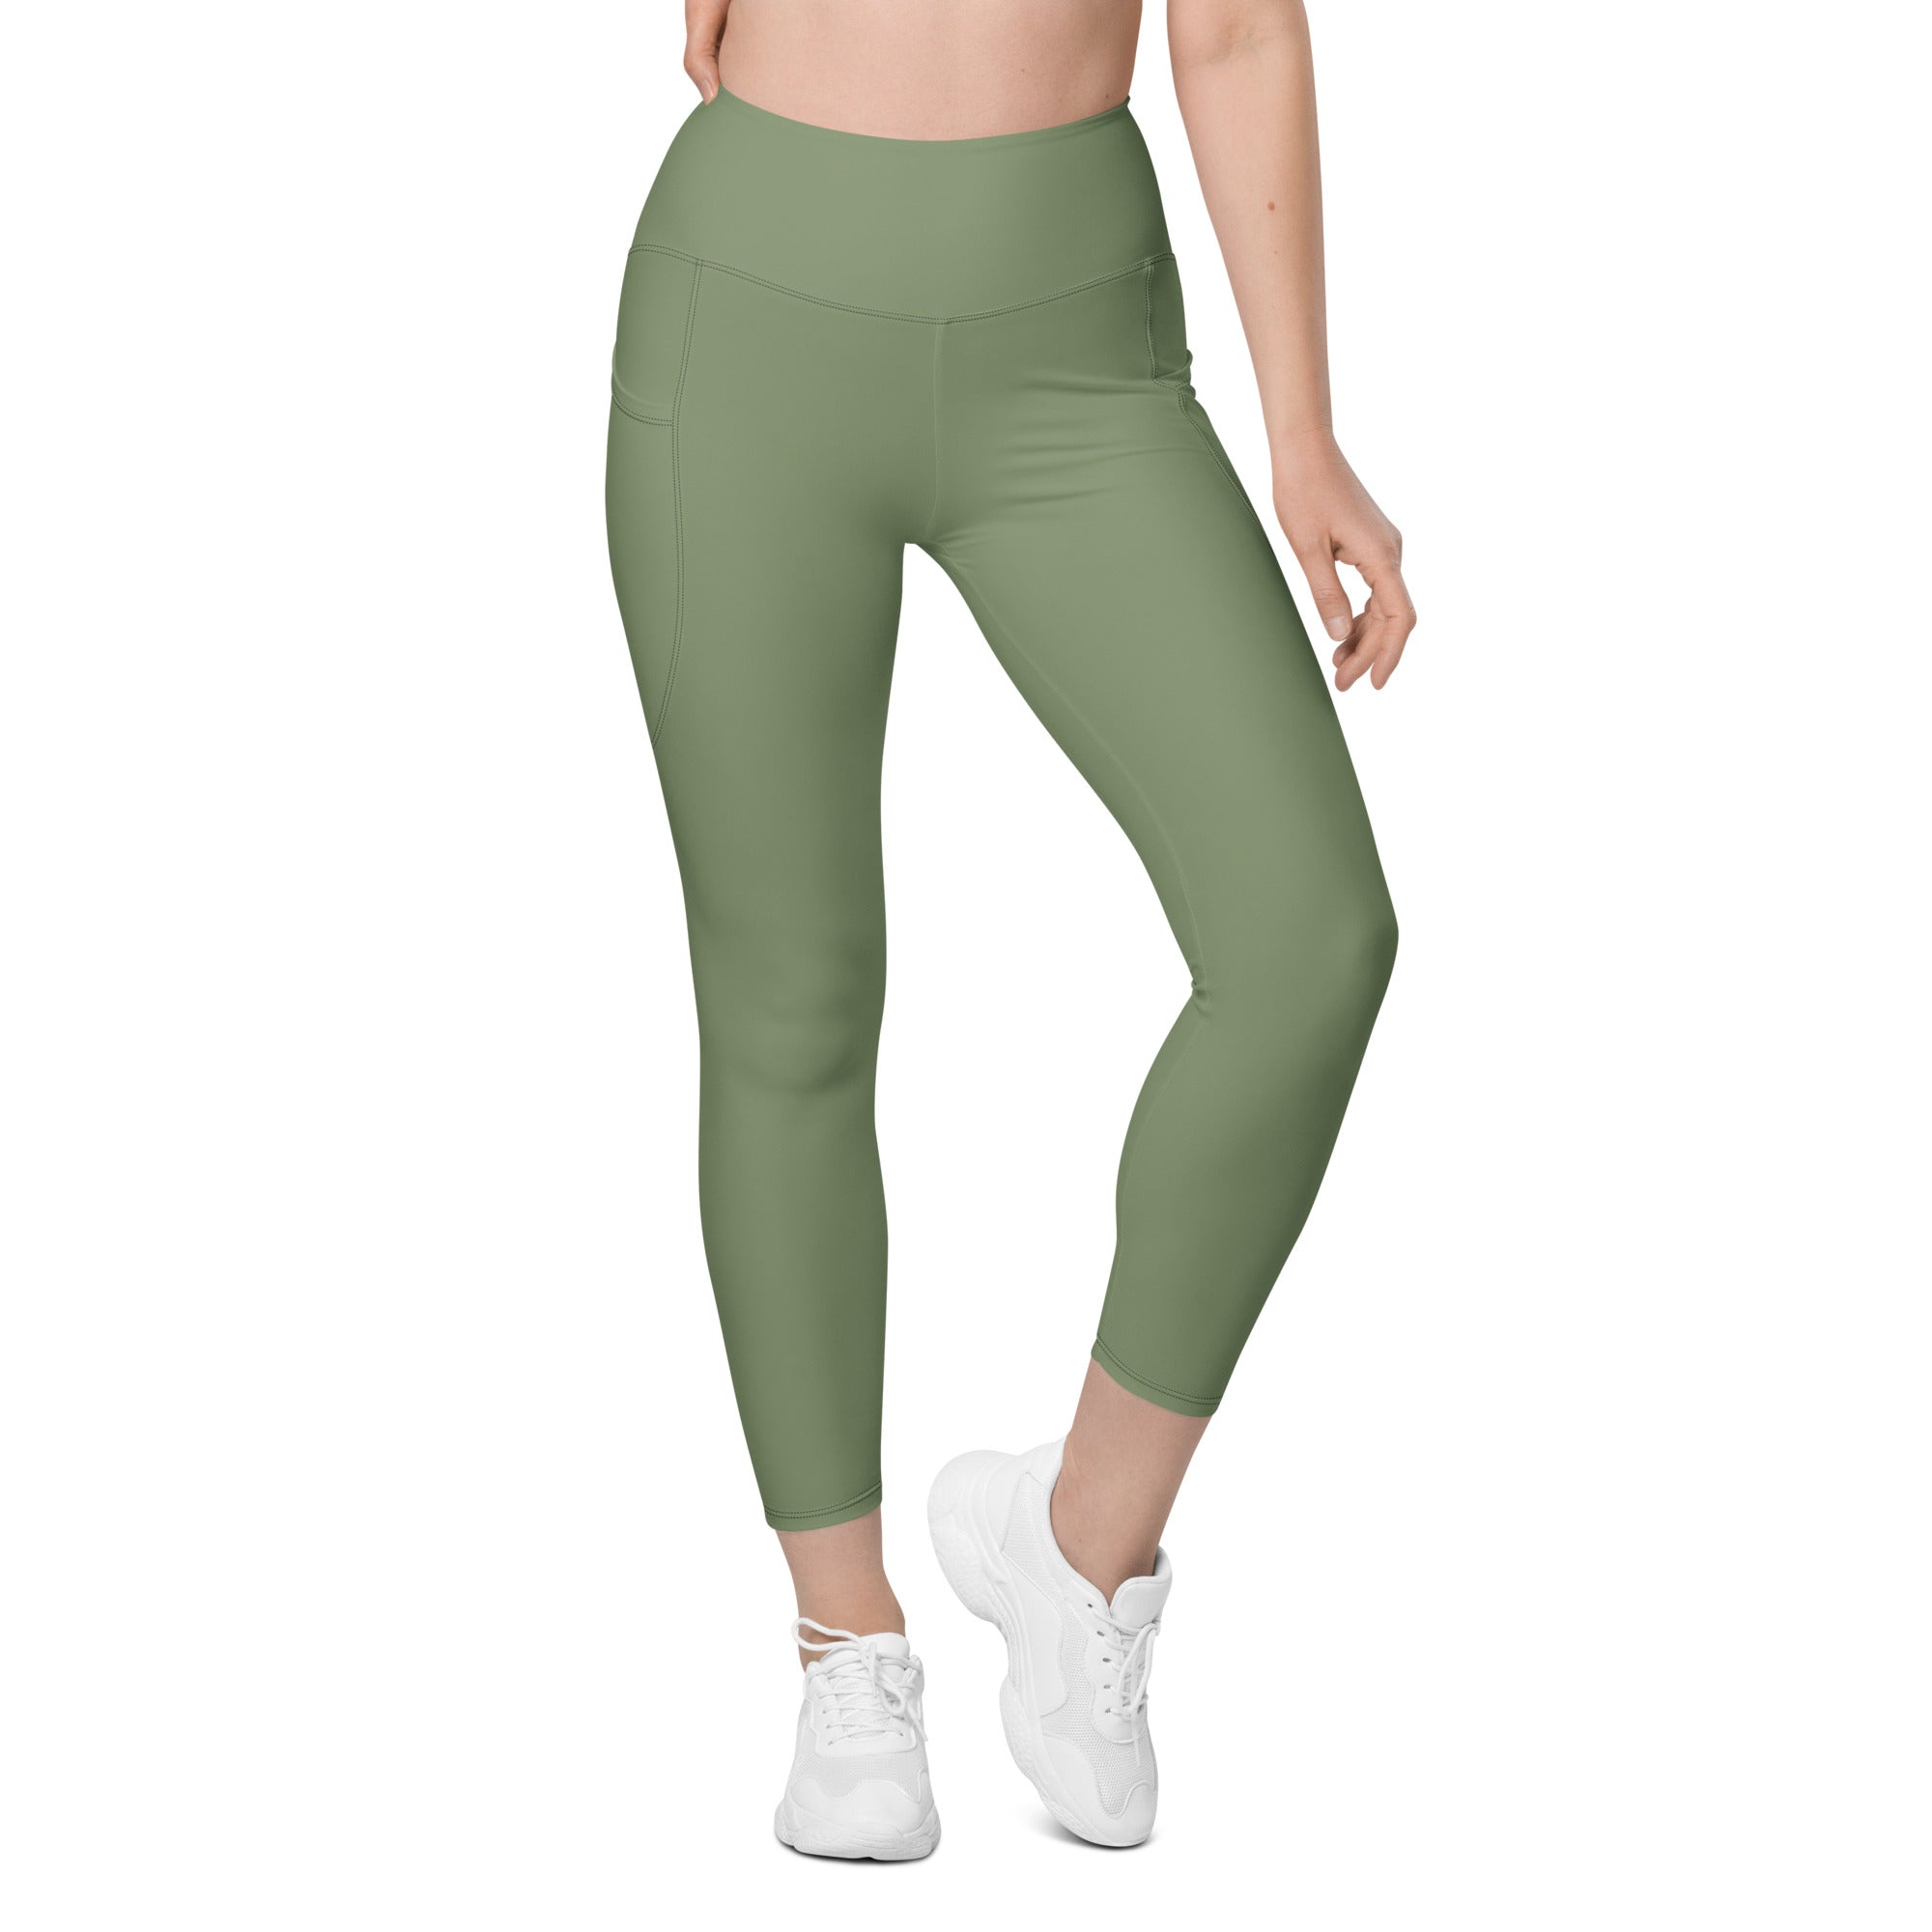 Army Green Leggings With Pockets